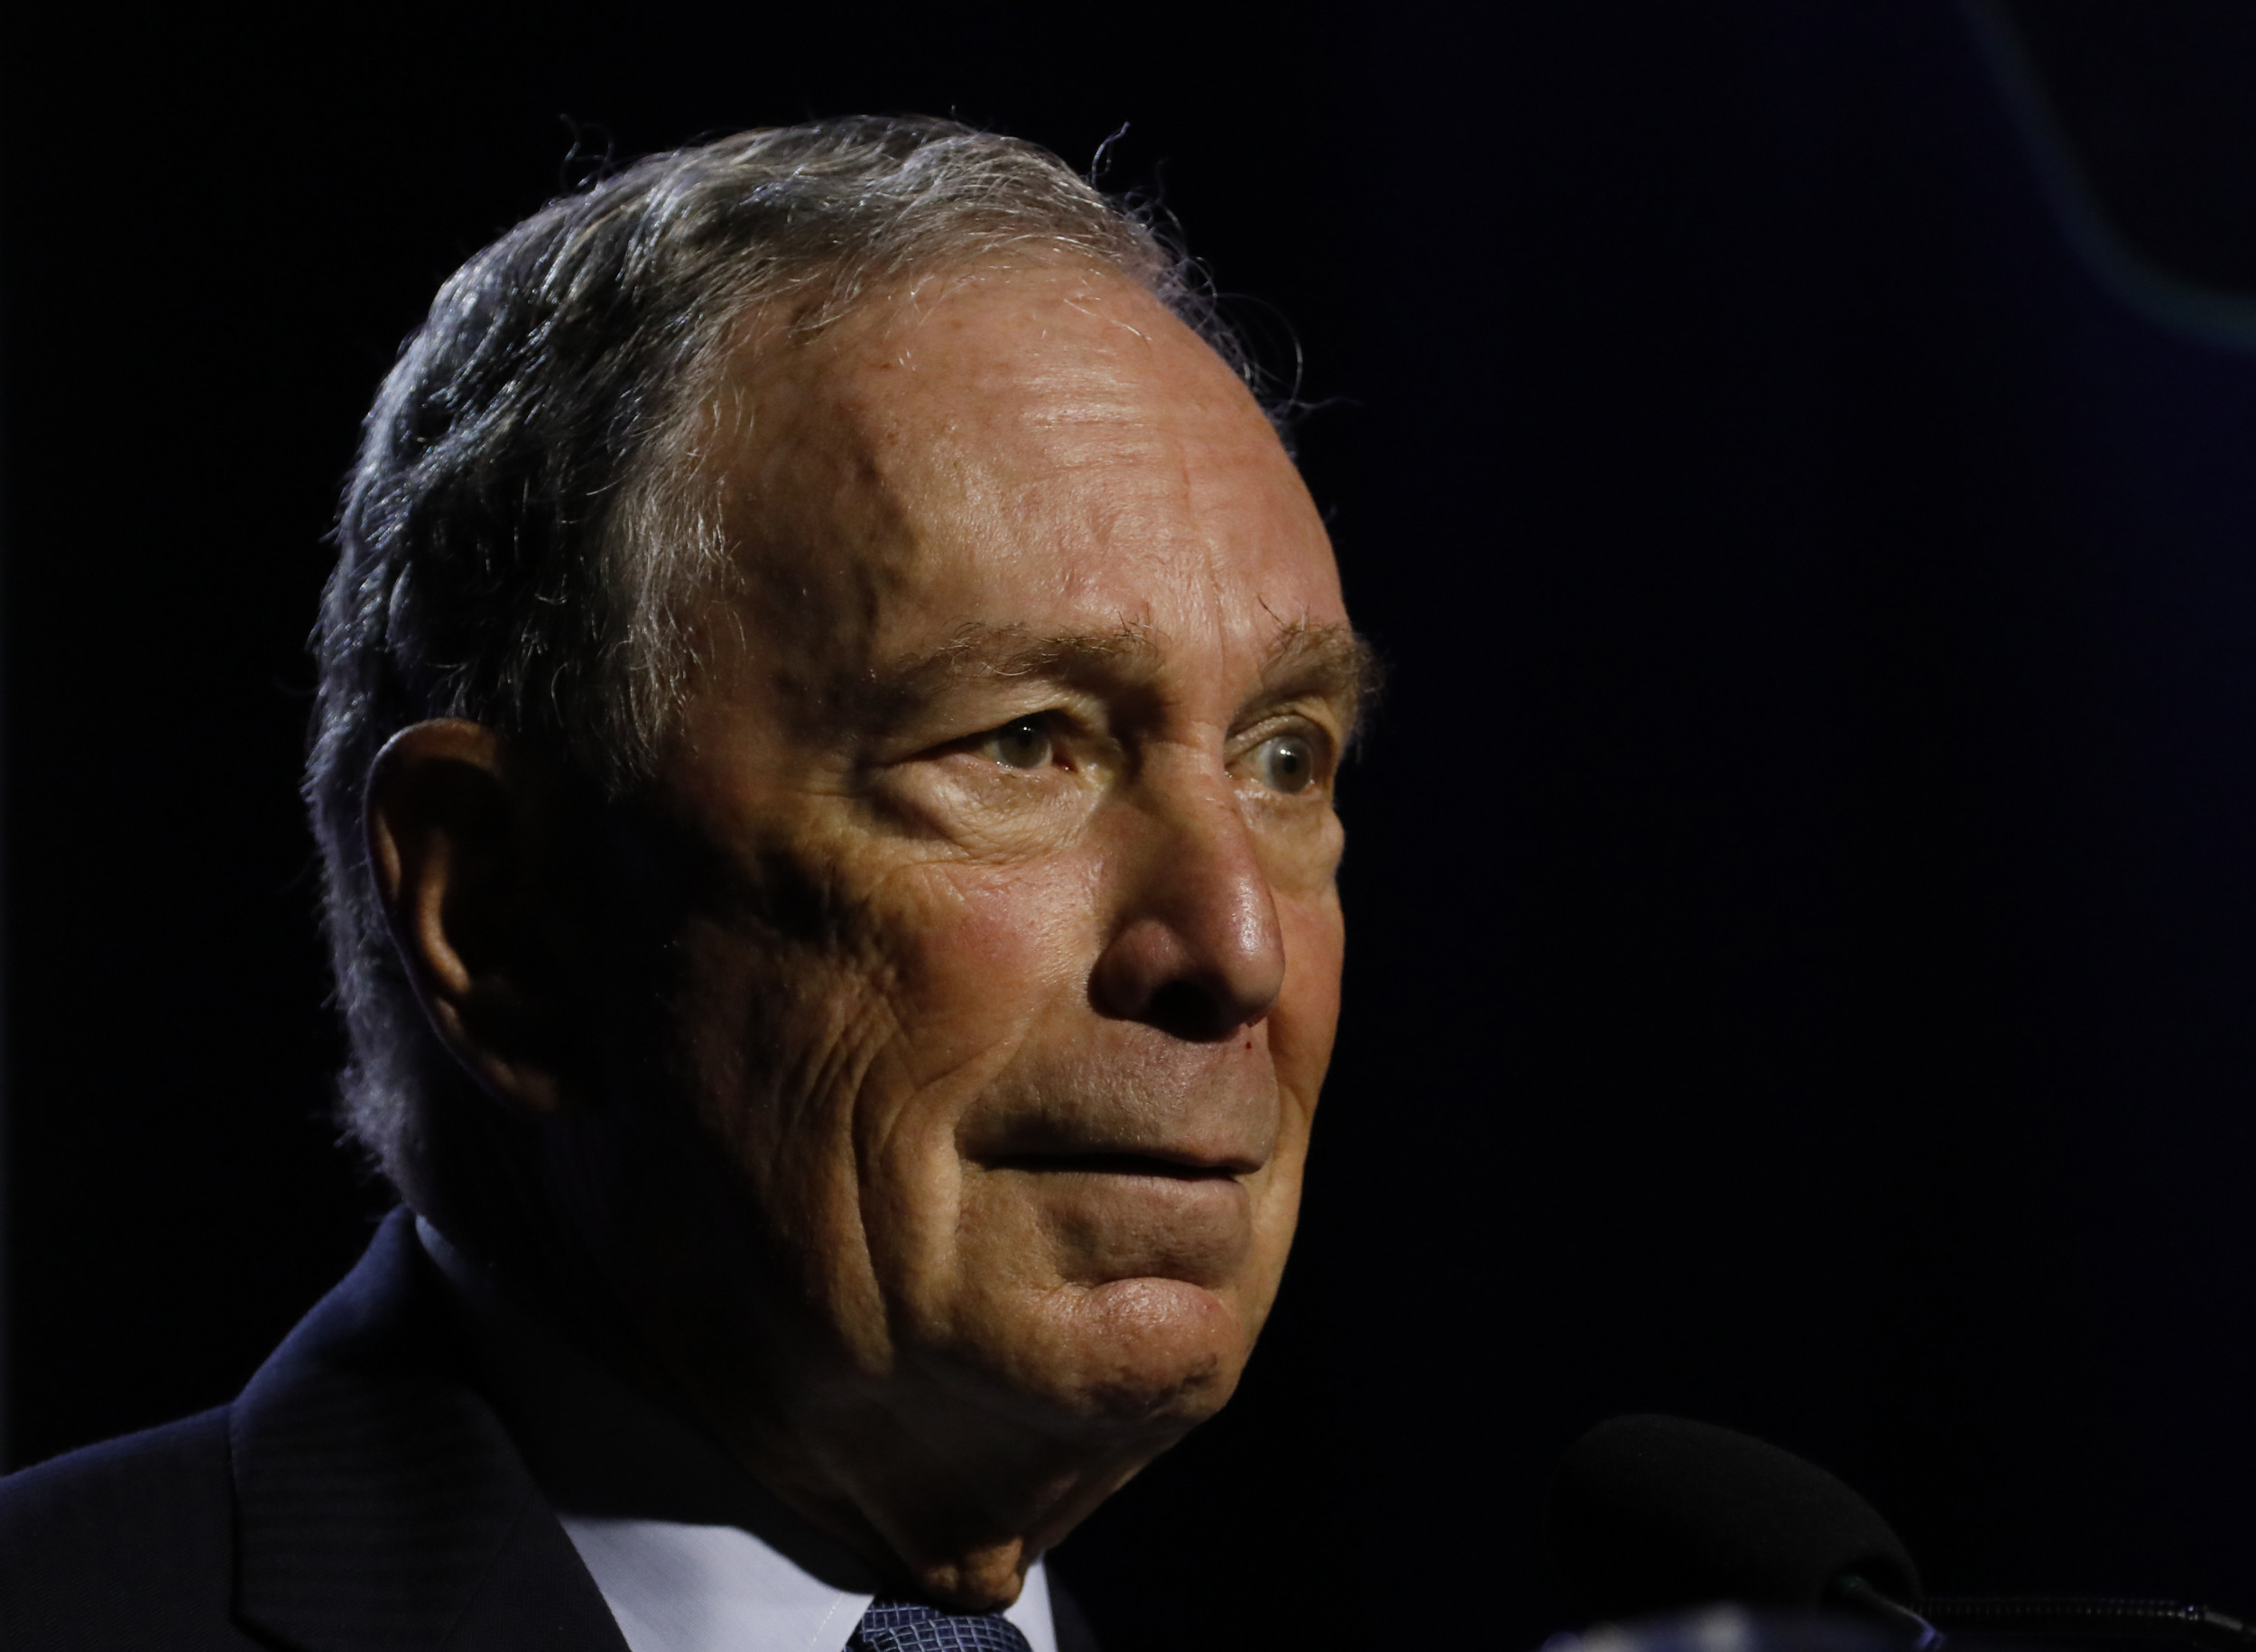 Michael Bloomberg president age 2020 campaign